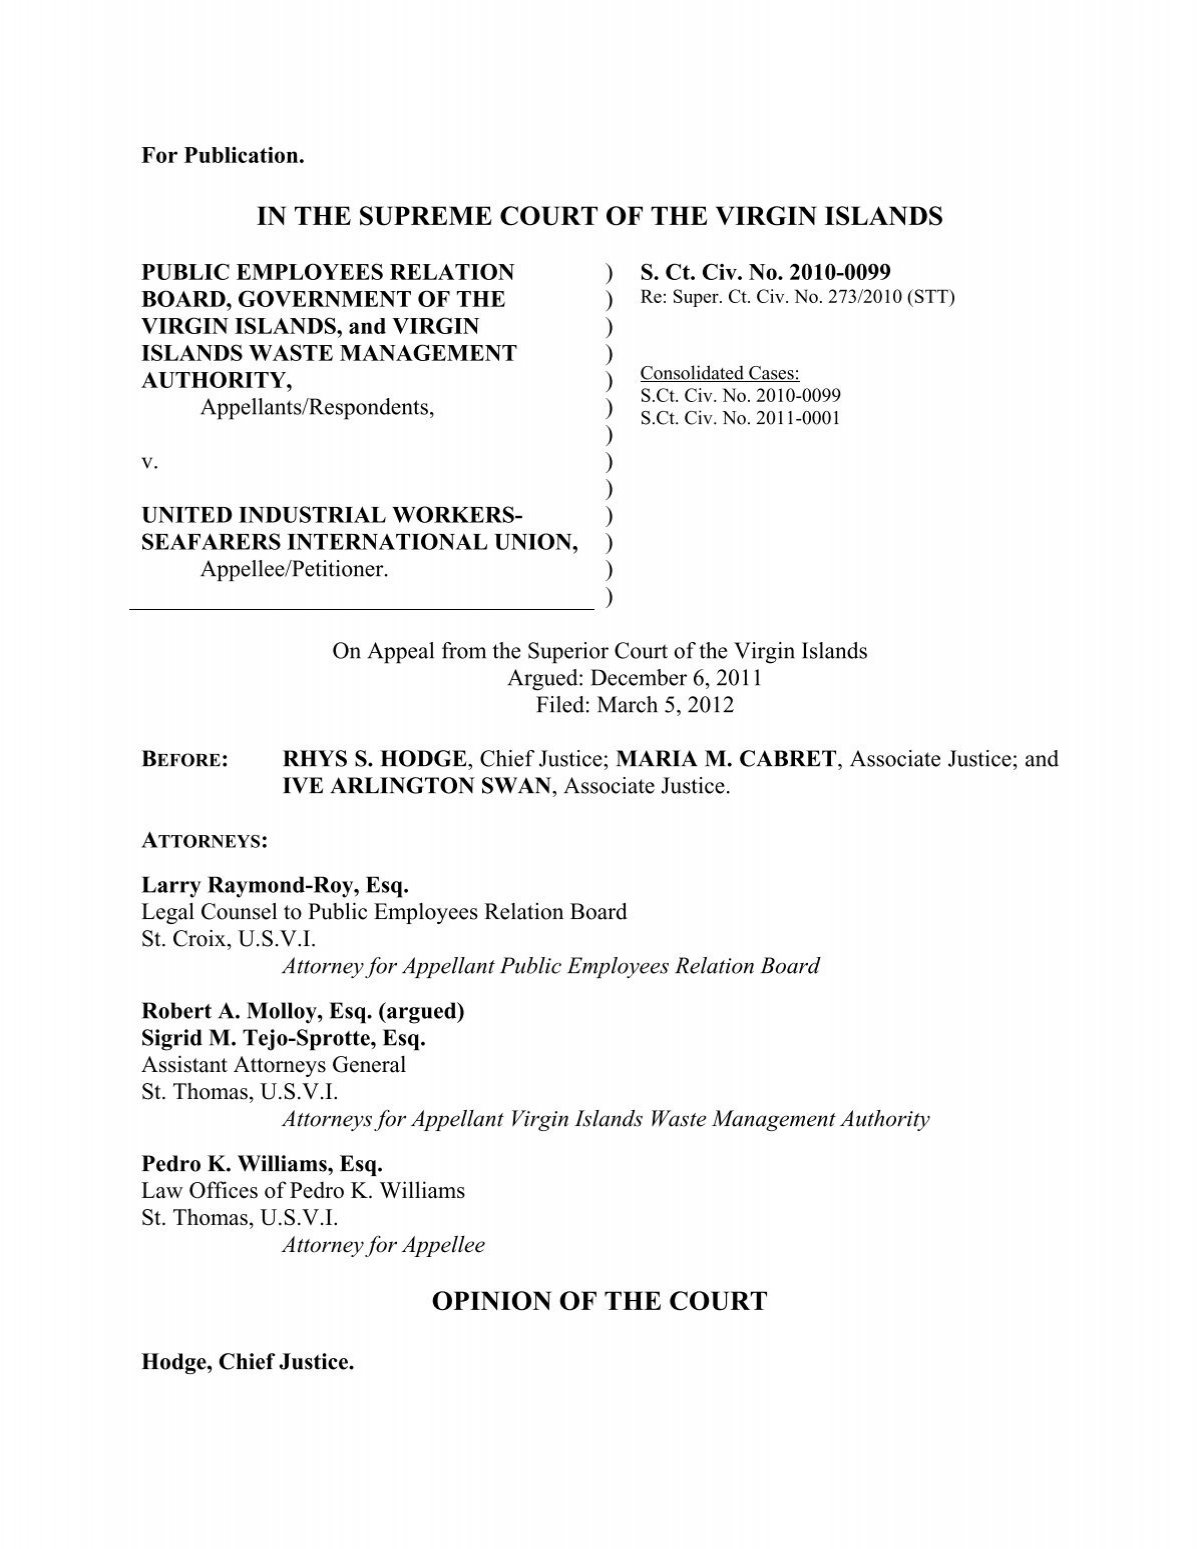 IN THE SUPREME COURT OF THE VIRGIN ISLANDS OPINION OF